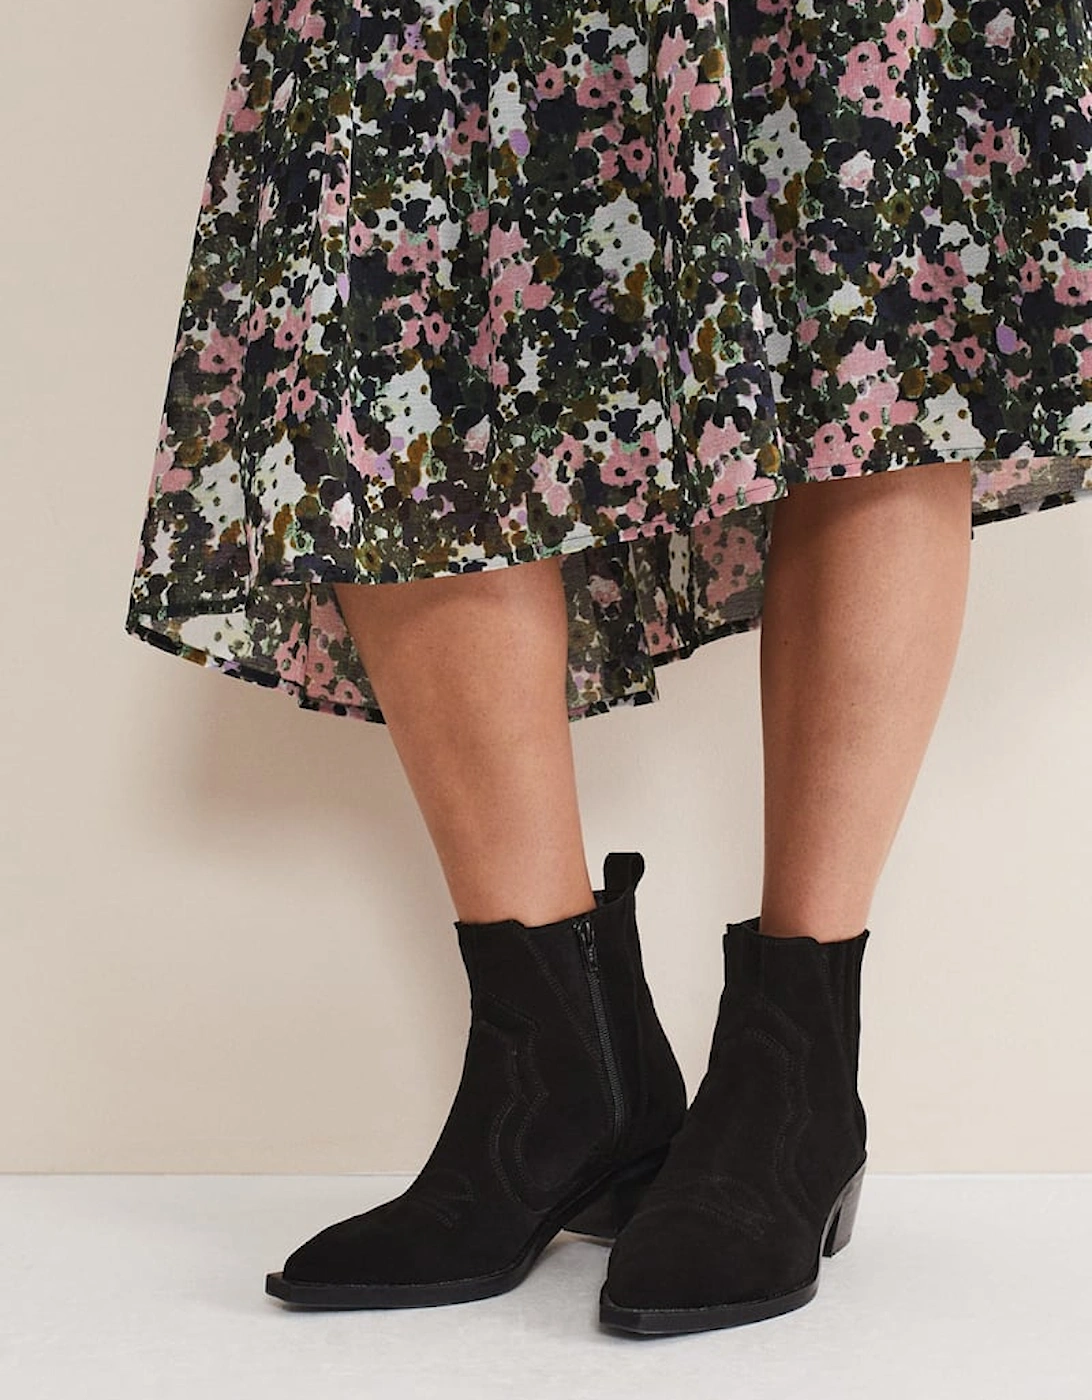 Stitch Detail Suede Ankle Boot